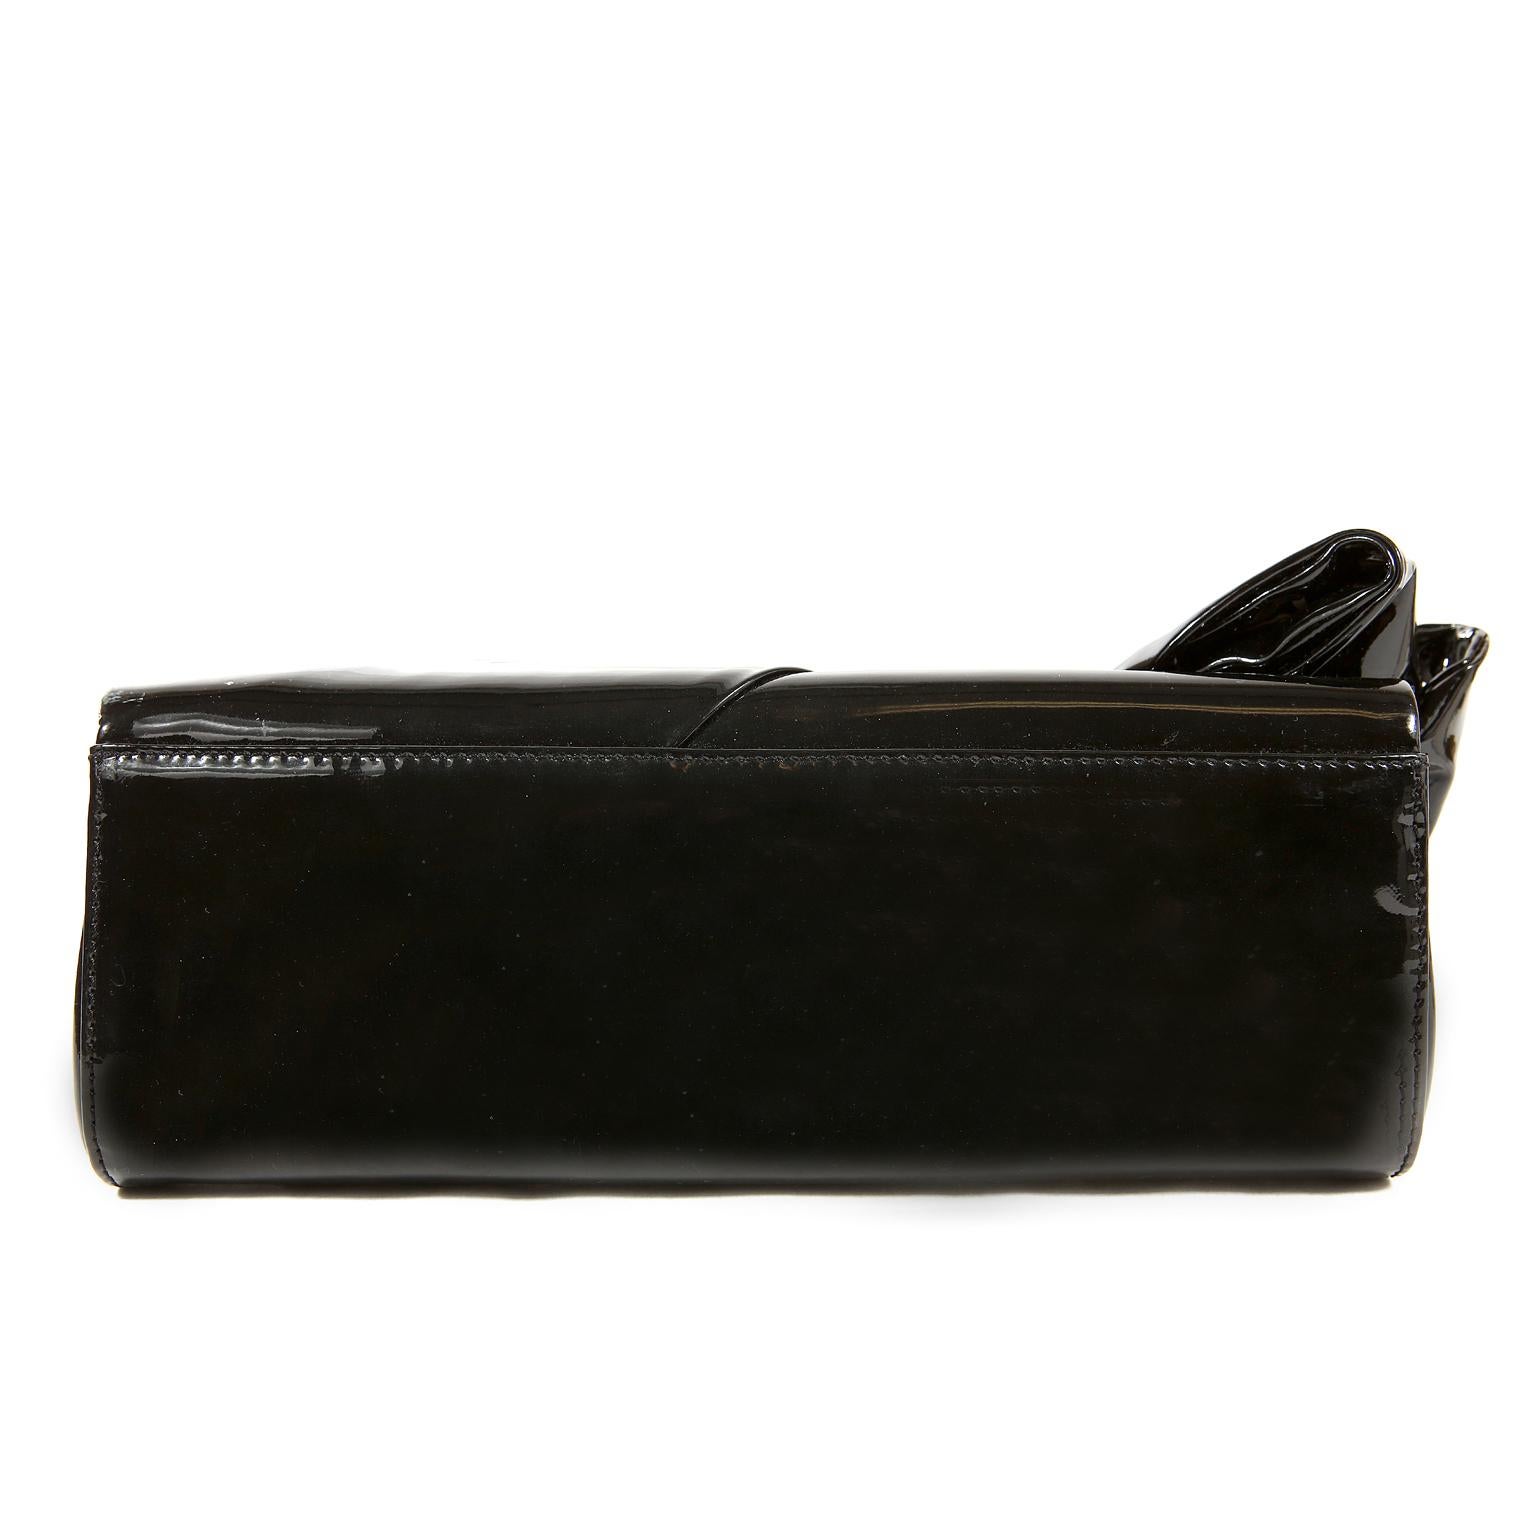 Christian Louboutin Black Patent Leather Bow Clutch- NEW unworn condition
 An elegant clutch, this Louboutin is certain to become a favorite in any wardrobe.
Gleaming black patent leather clutch has a large decorative bow on the front.  Red satin